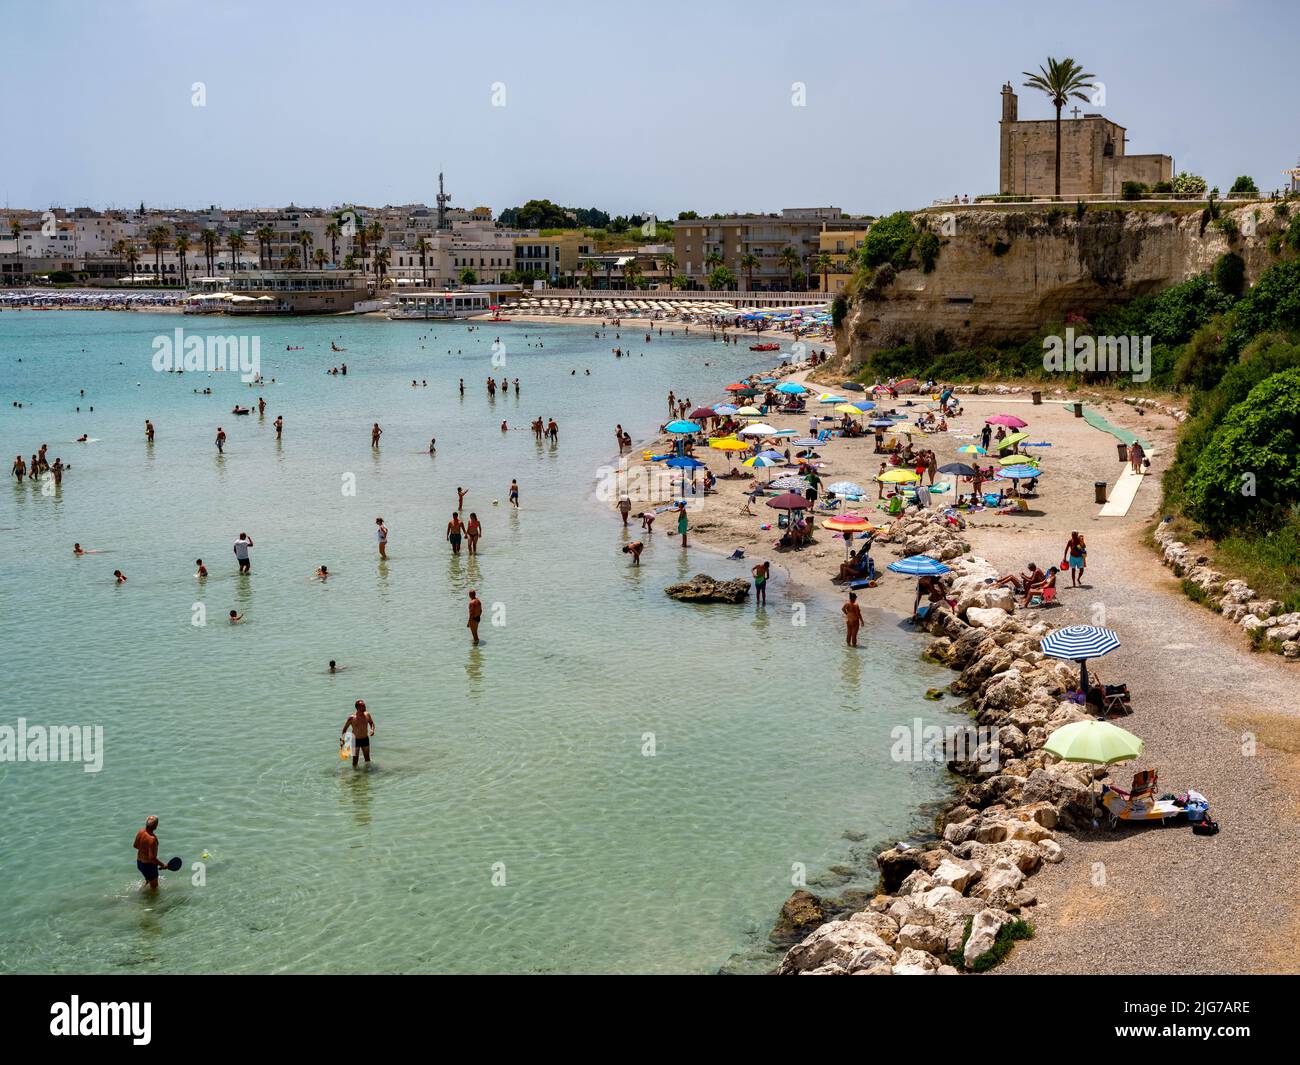 Panoramic view of the Bay of Otranto during the summer with bathers enjoying the turquoise water with the skyline of Otranto in the distance Stock Photo